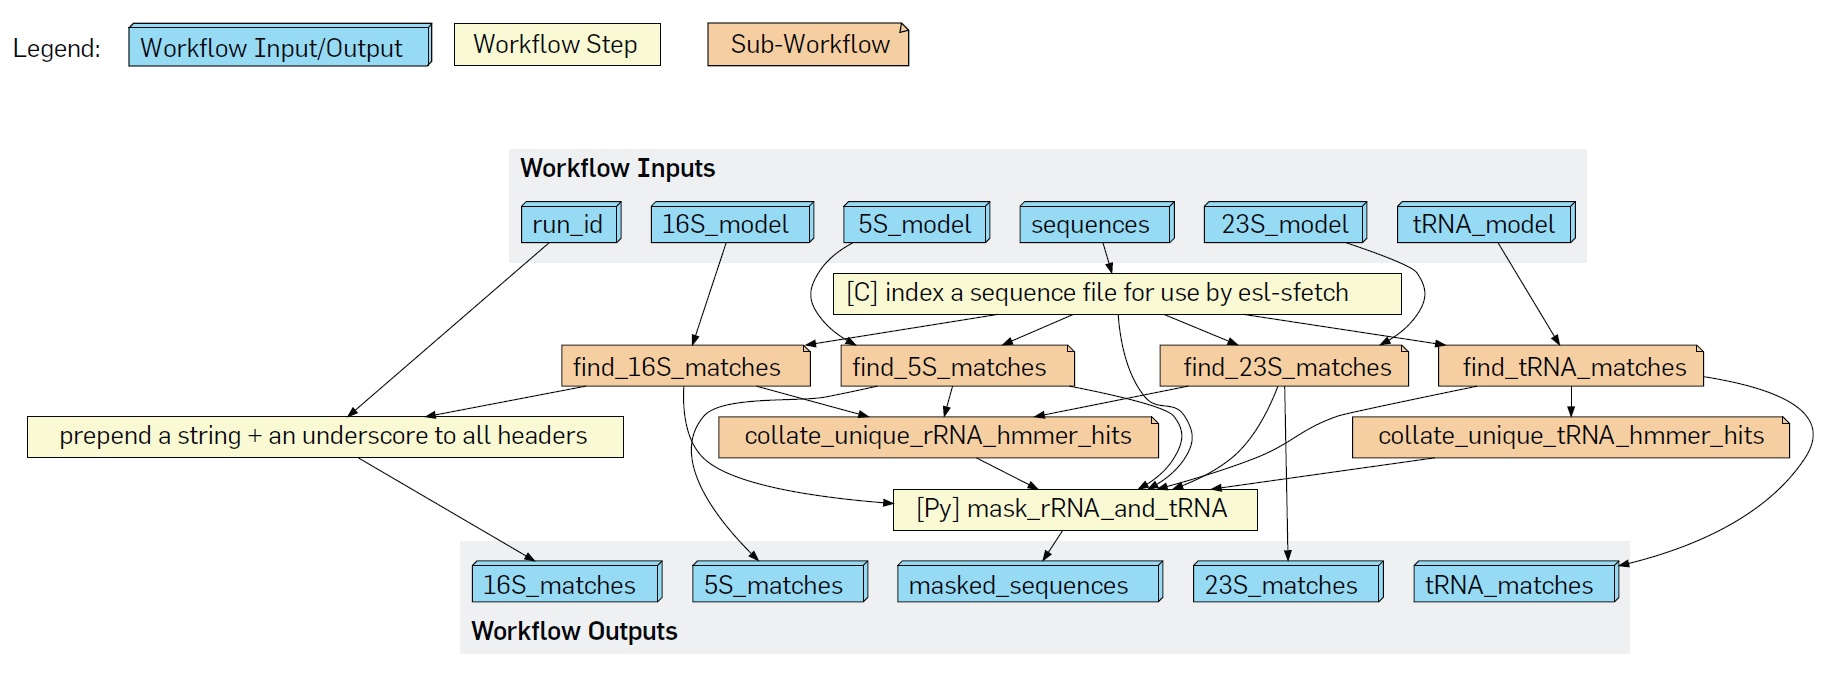 Part of a large microbiome bioinformatics CWL workflow. (Source: [1], diagram adapted from from a corresponding CWL workflow of the EBI Metagenomics project.)